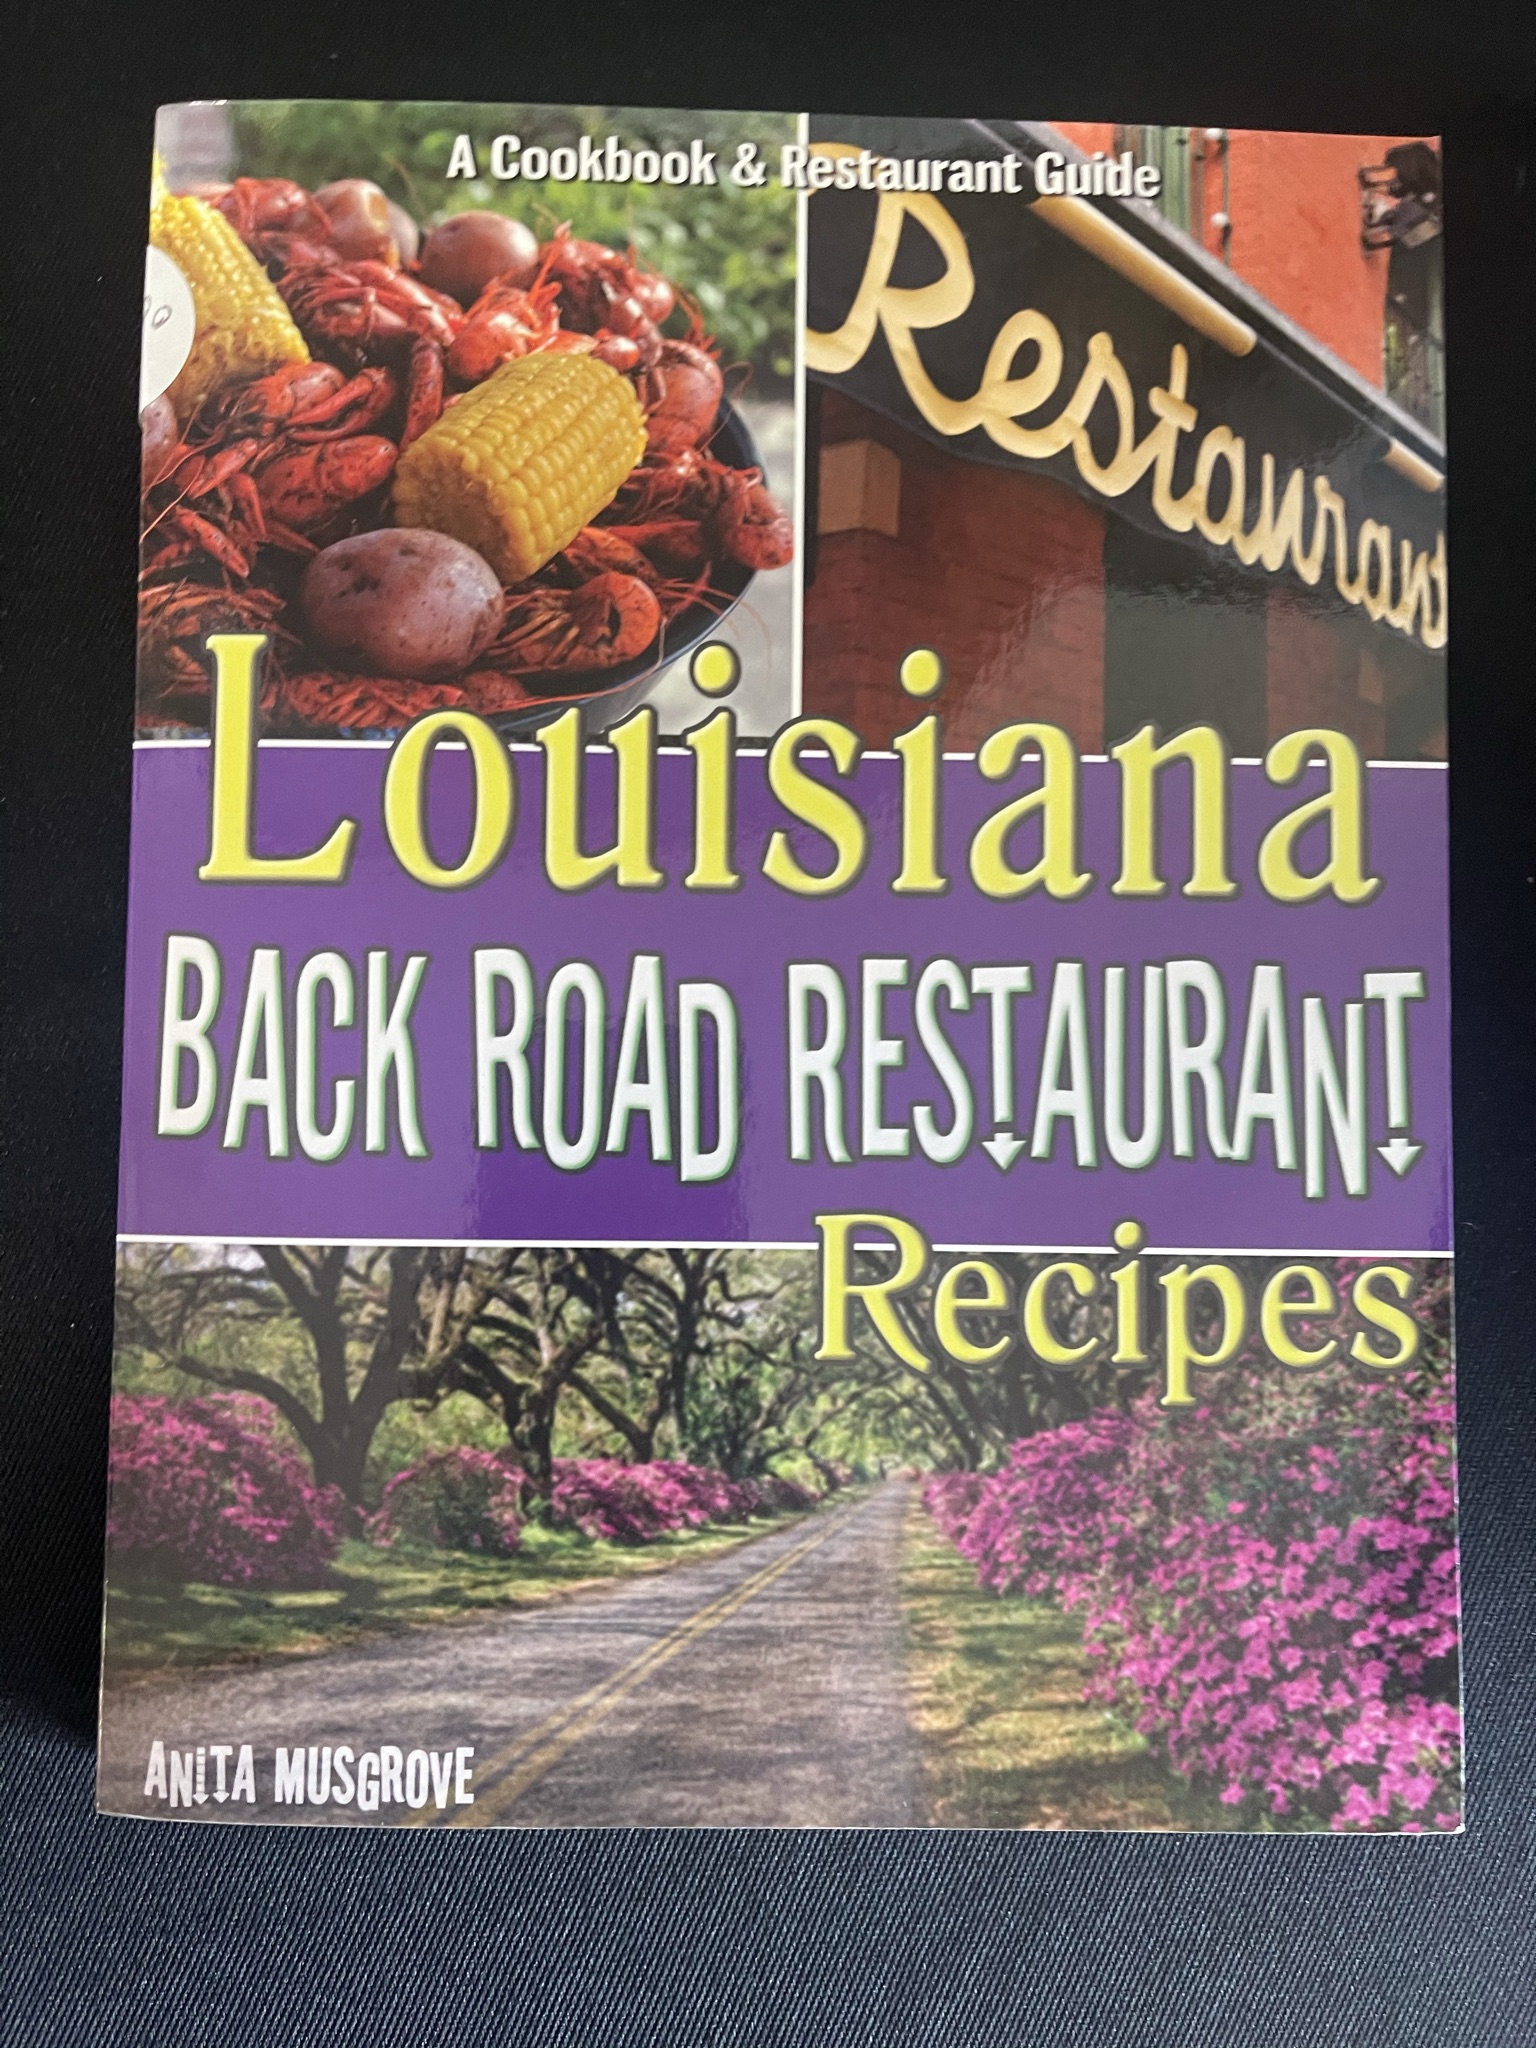 Featured image for “Louisiana Back Road Restaurant”